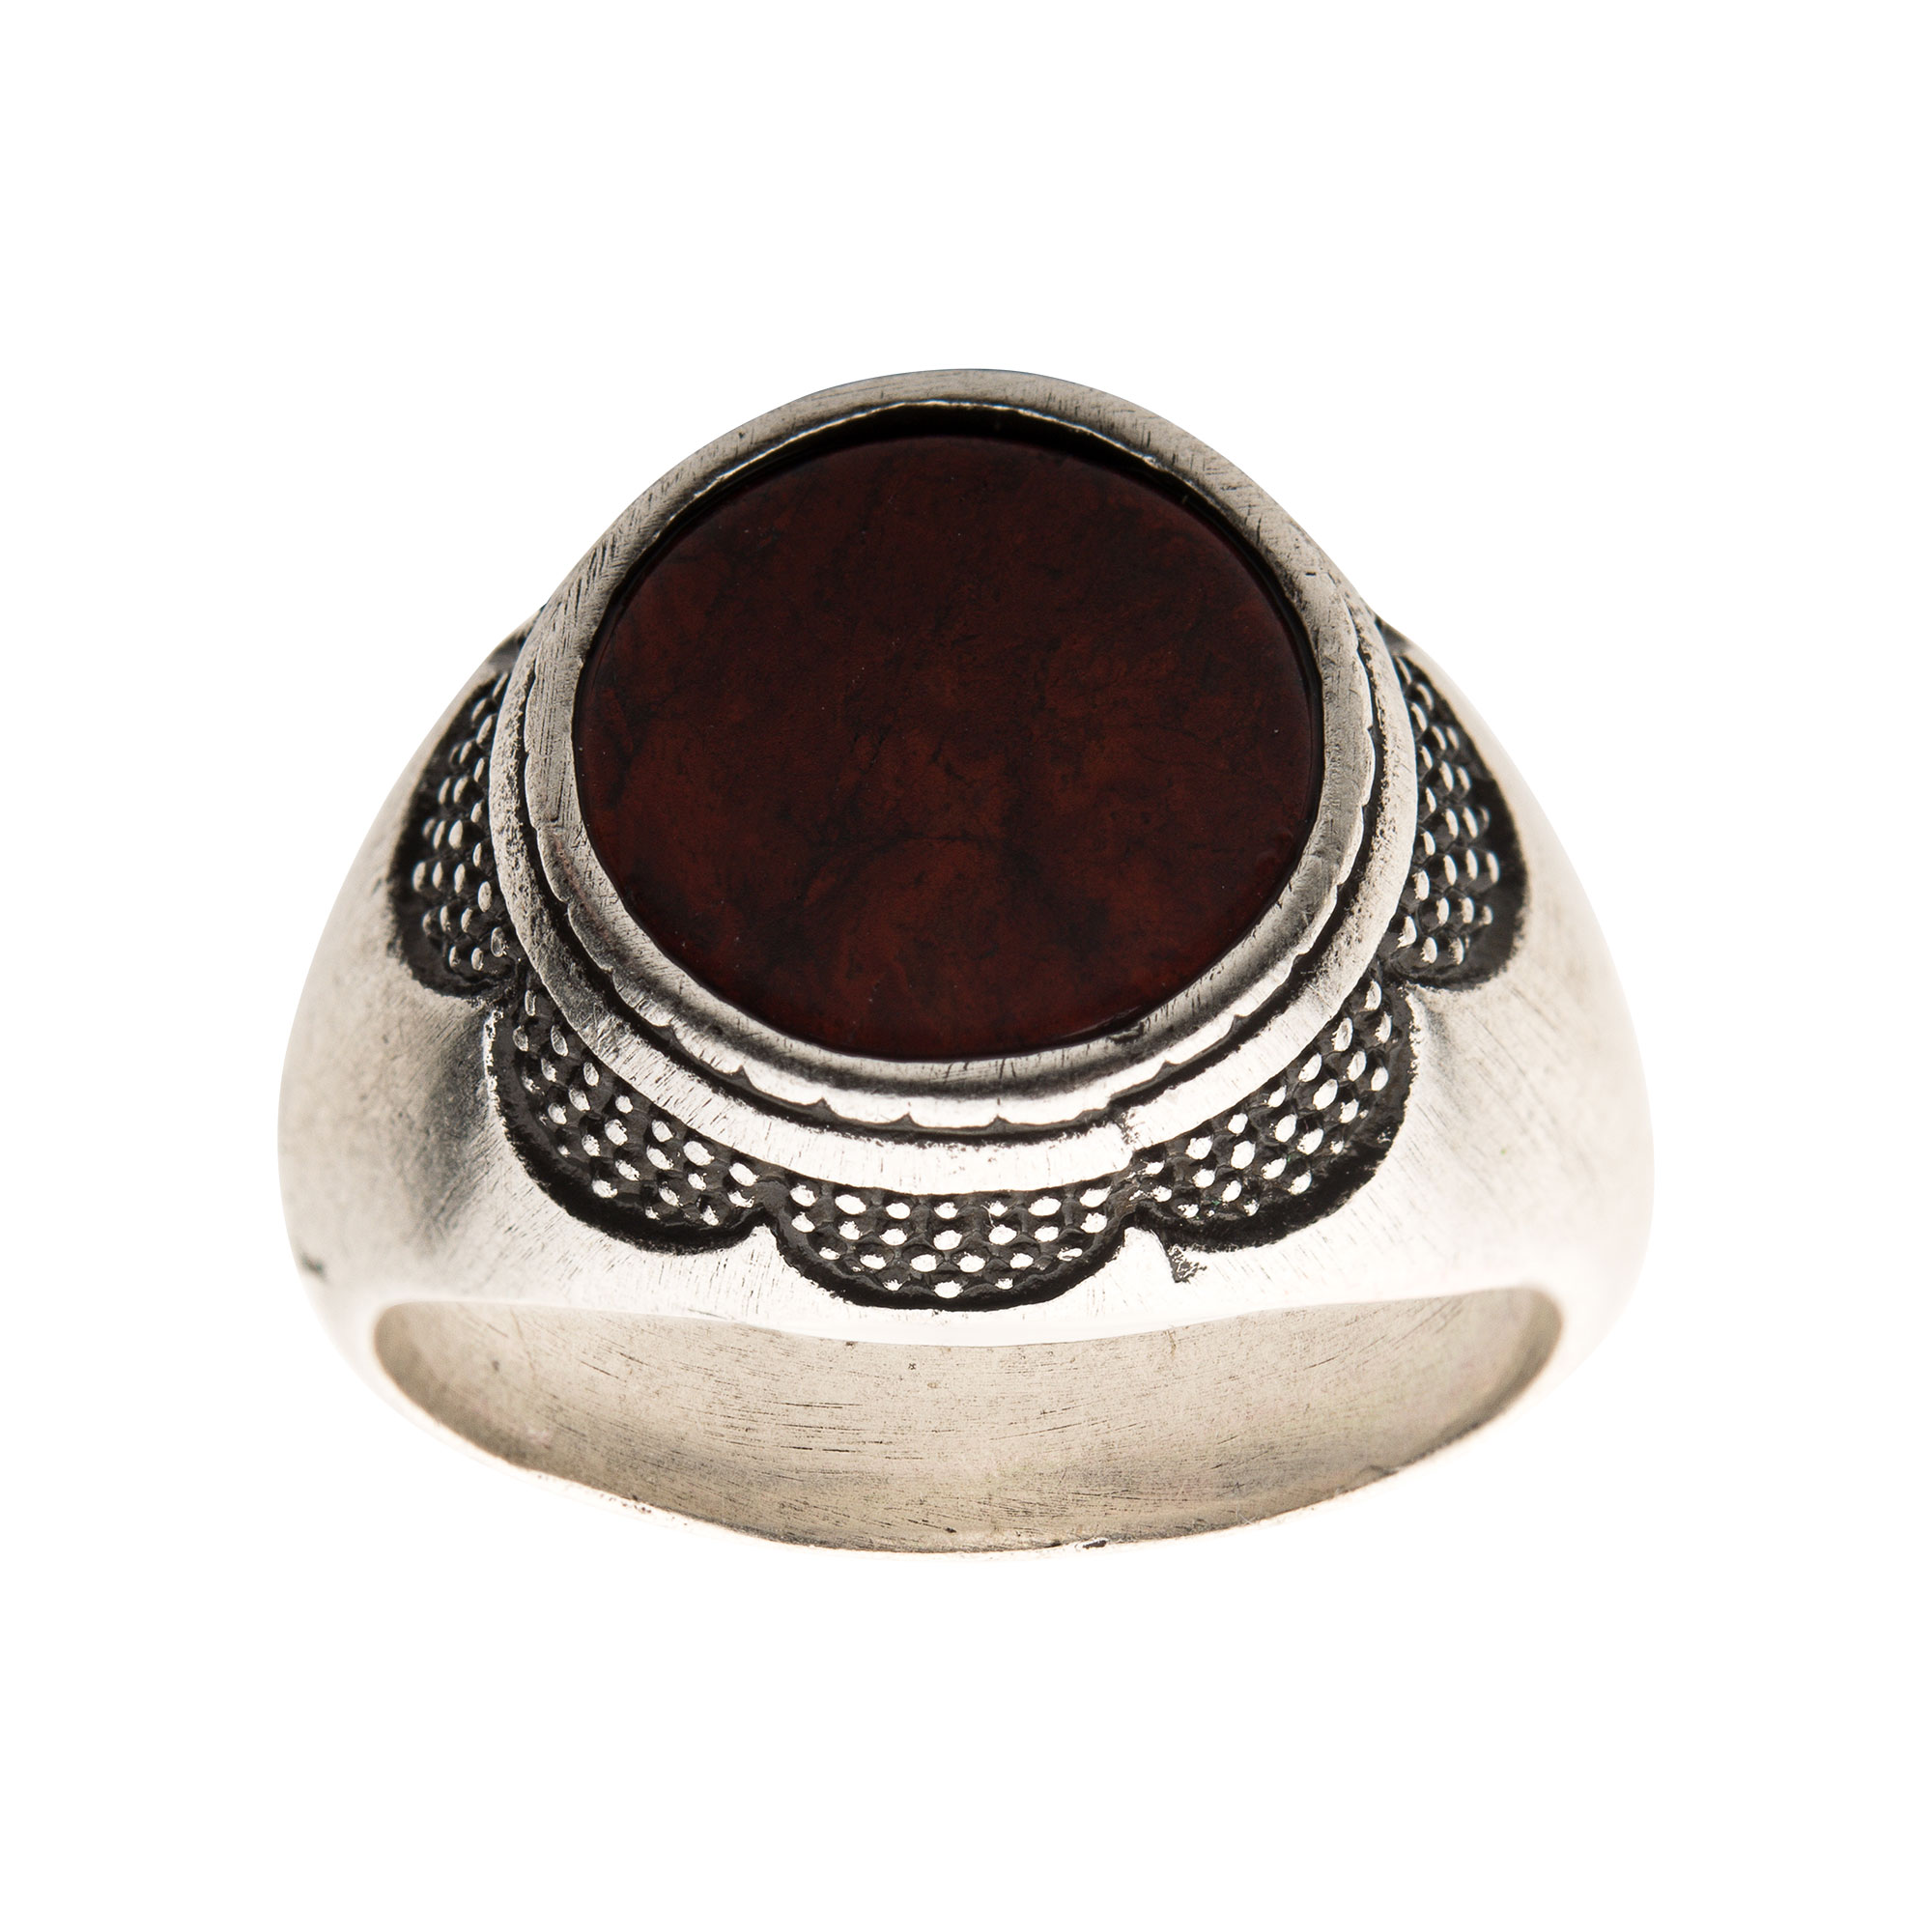 Stainless Steel Silver Plated with Red Jasper Stone Ring Image 2 P.K. Bennett Jewelers Mundelein, IL